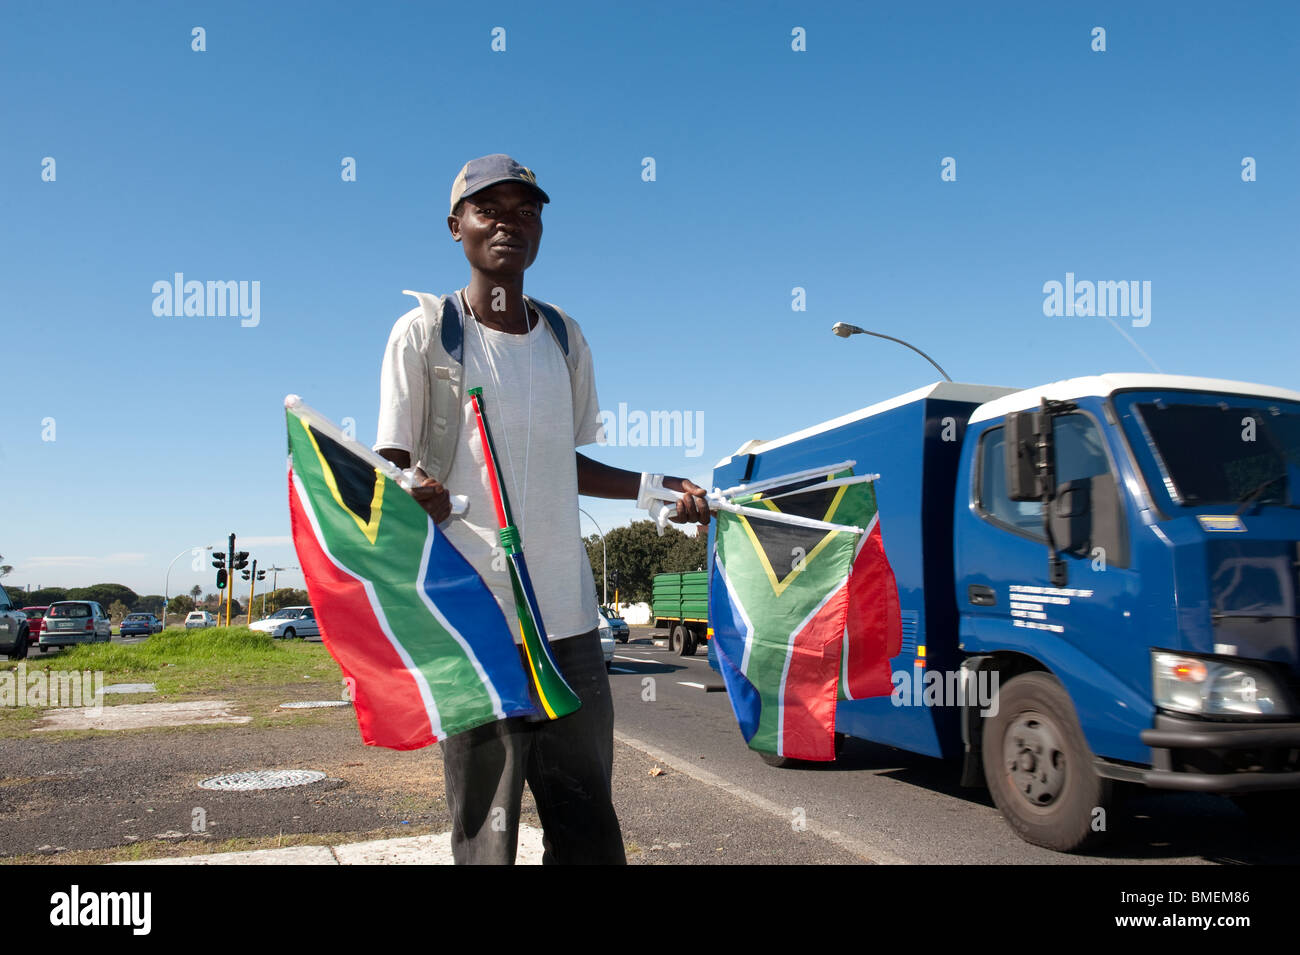 Street vendors sell south african flags in the run-up to the FIFA World Cup 2010 Cape Town South Africa Stock Photo